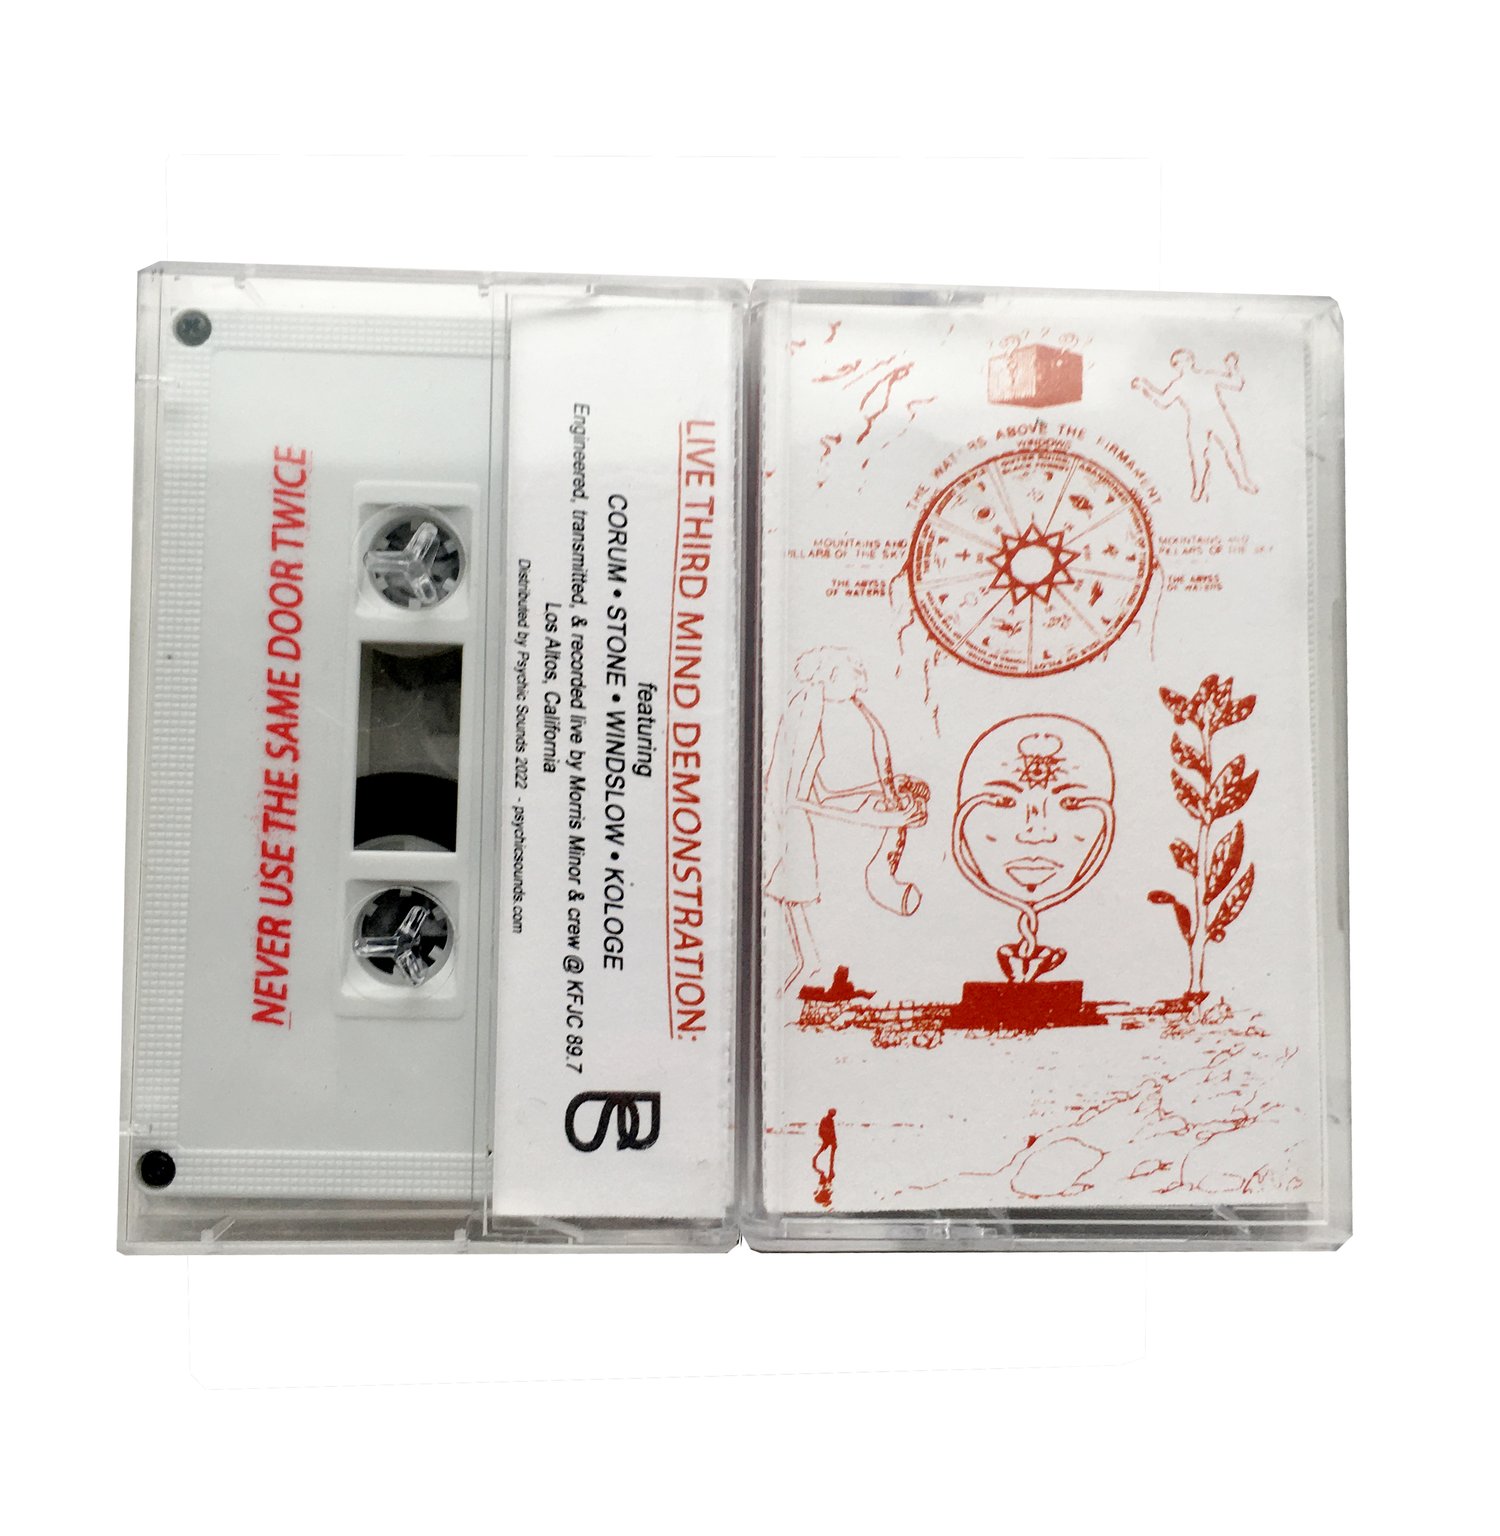 Never Use The Same Door Twice {live} cassette